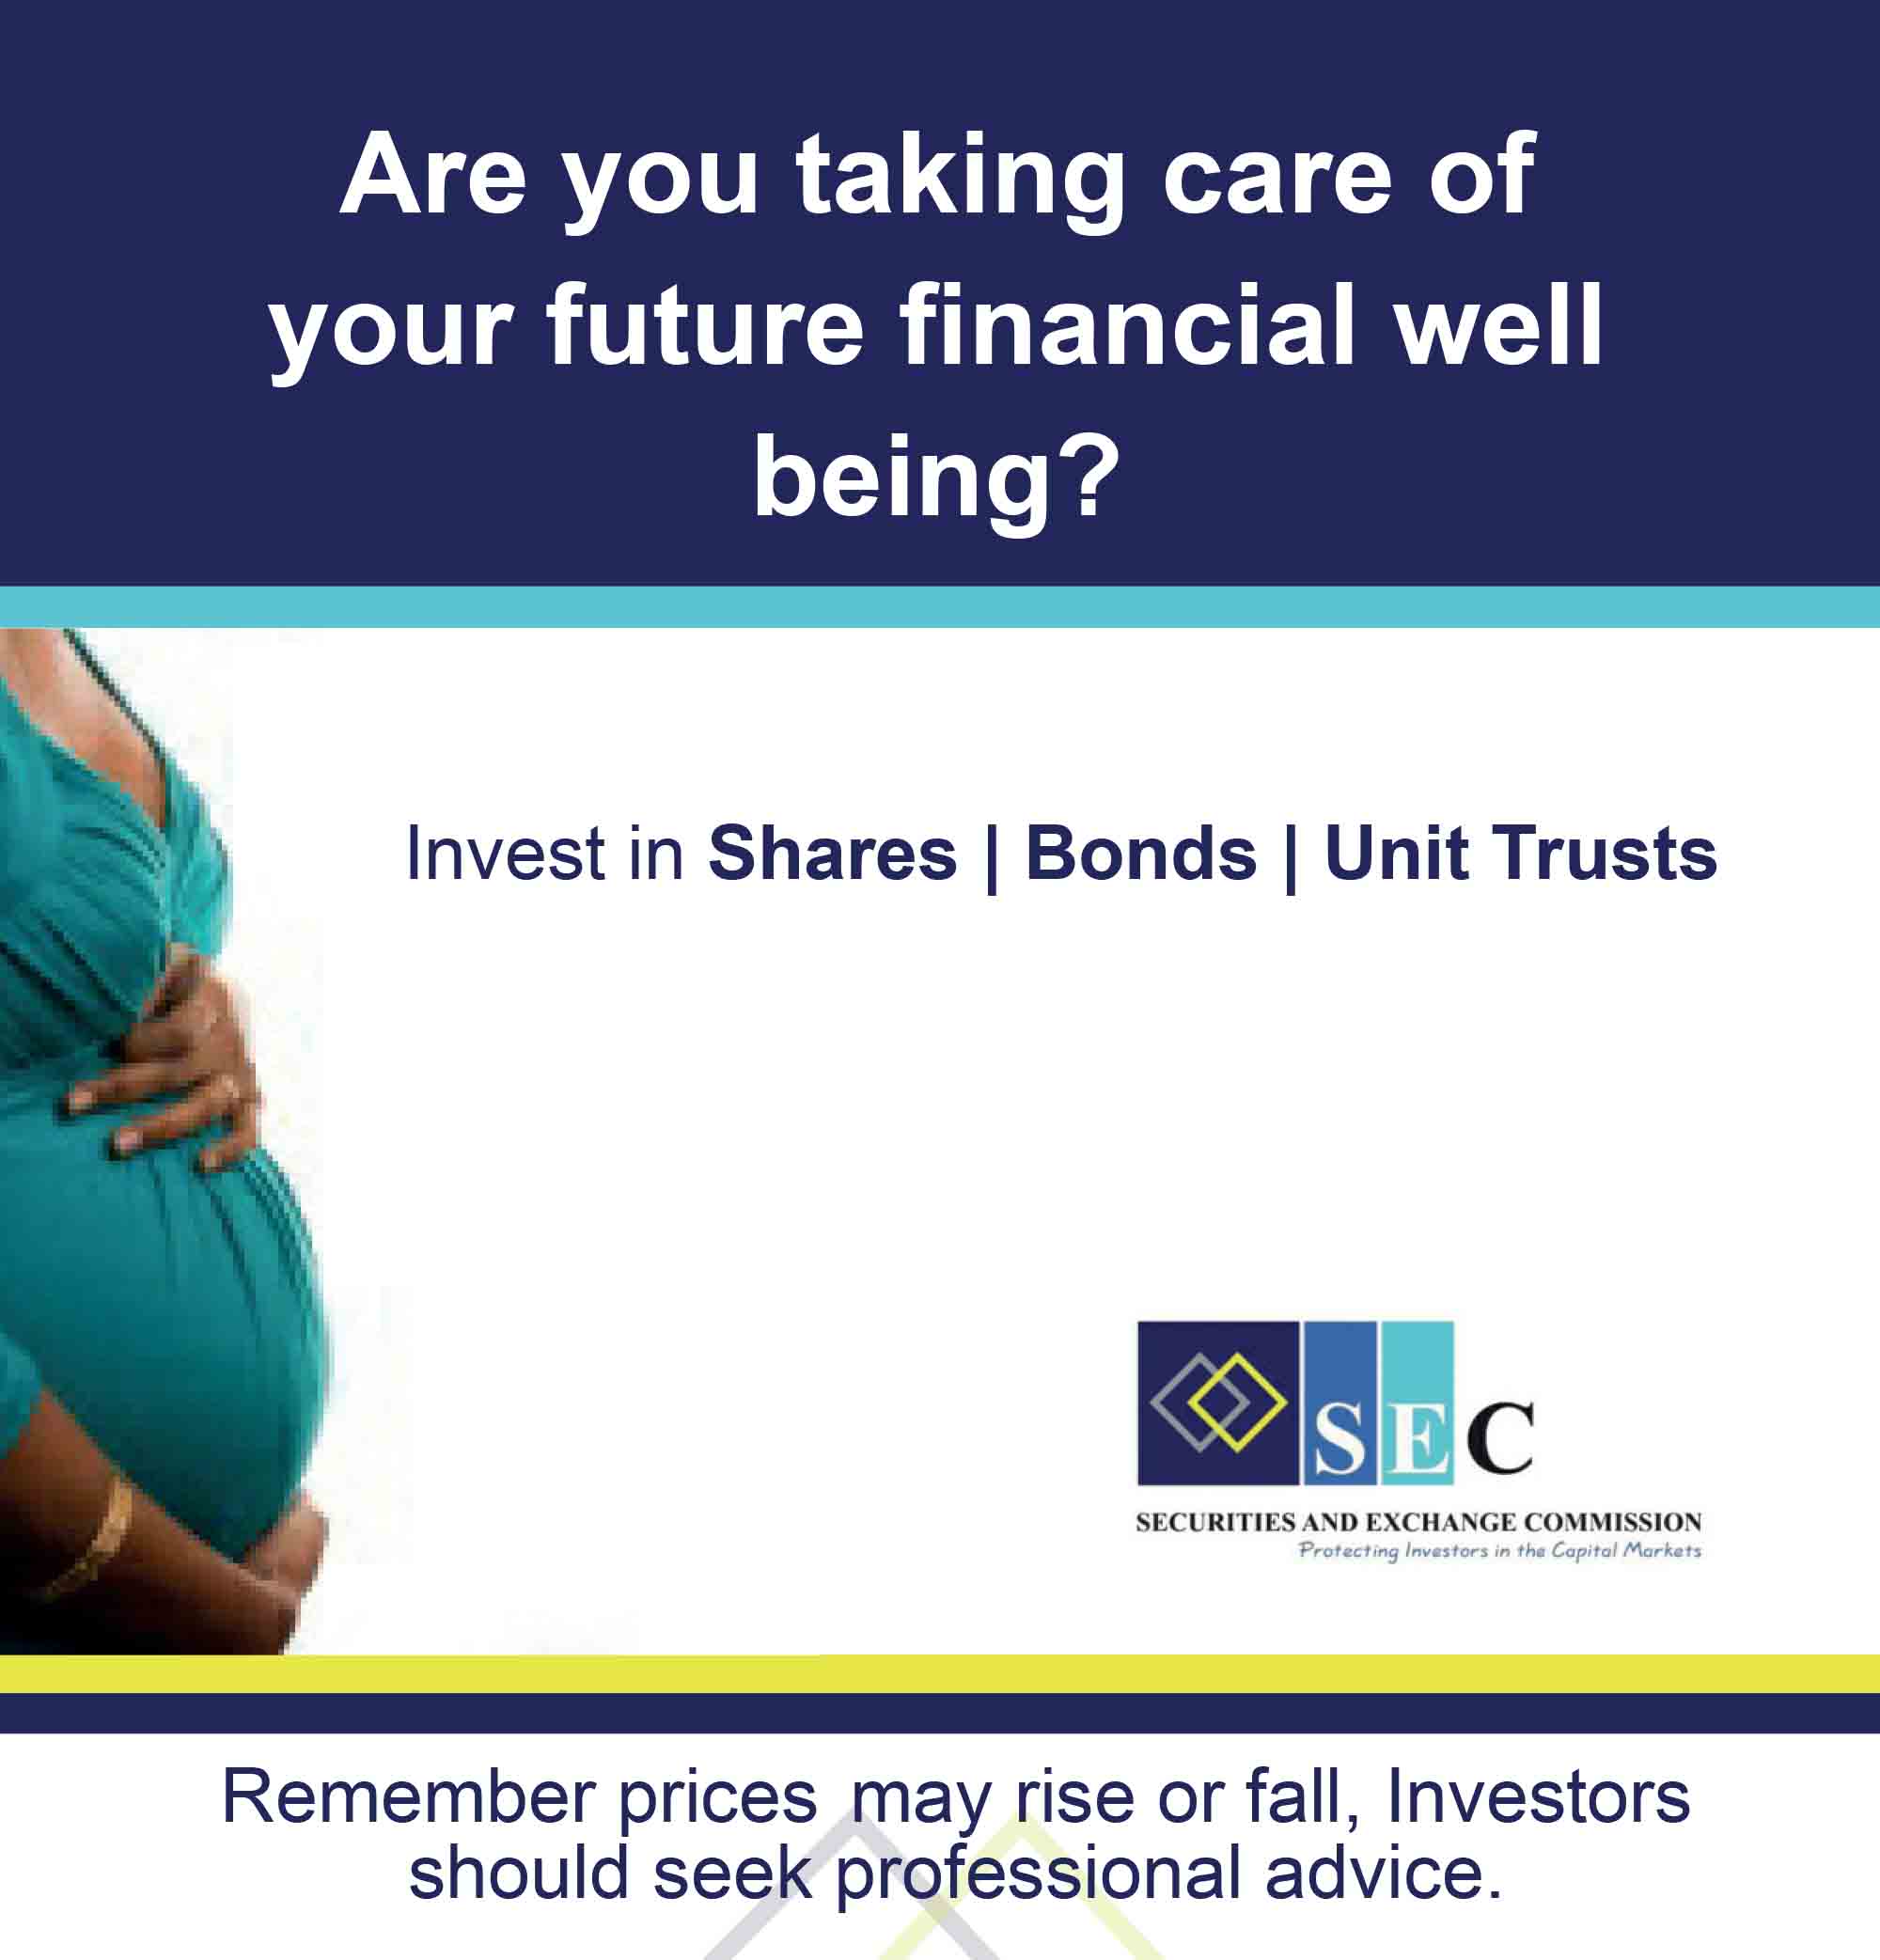 are you taking care of your financial future